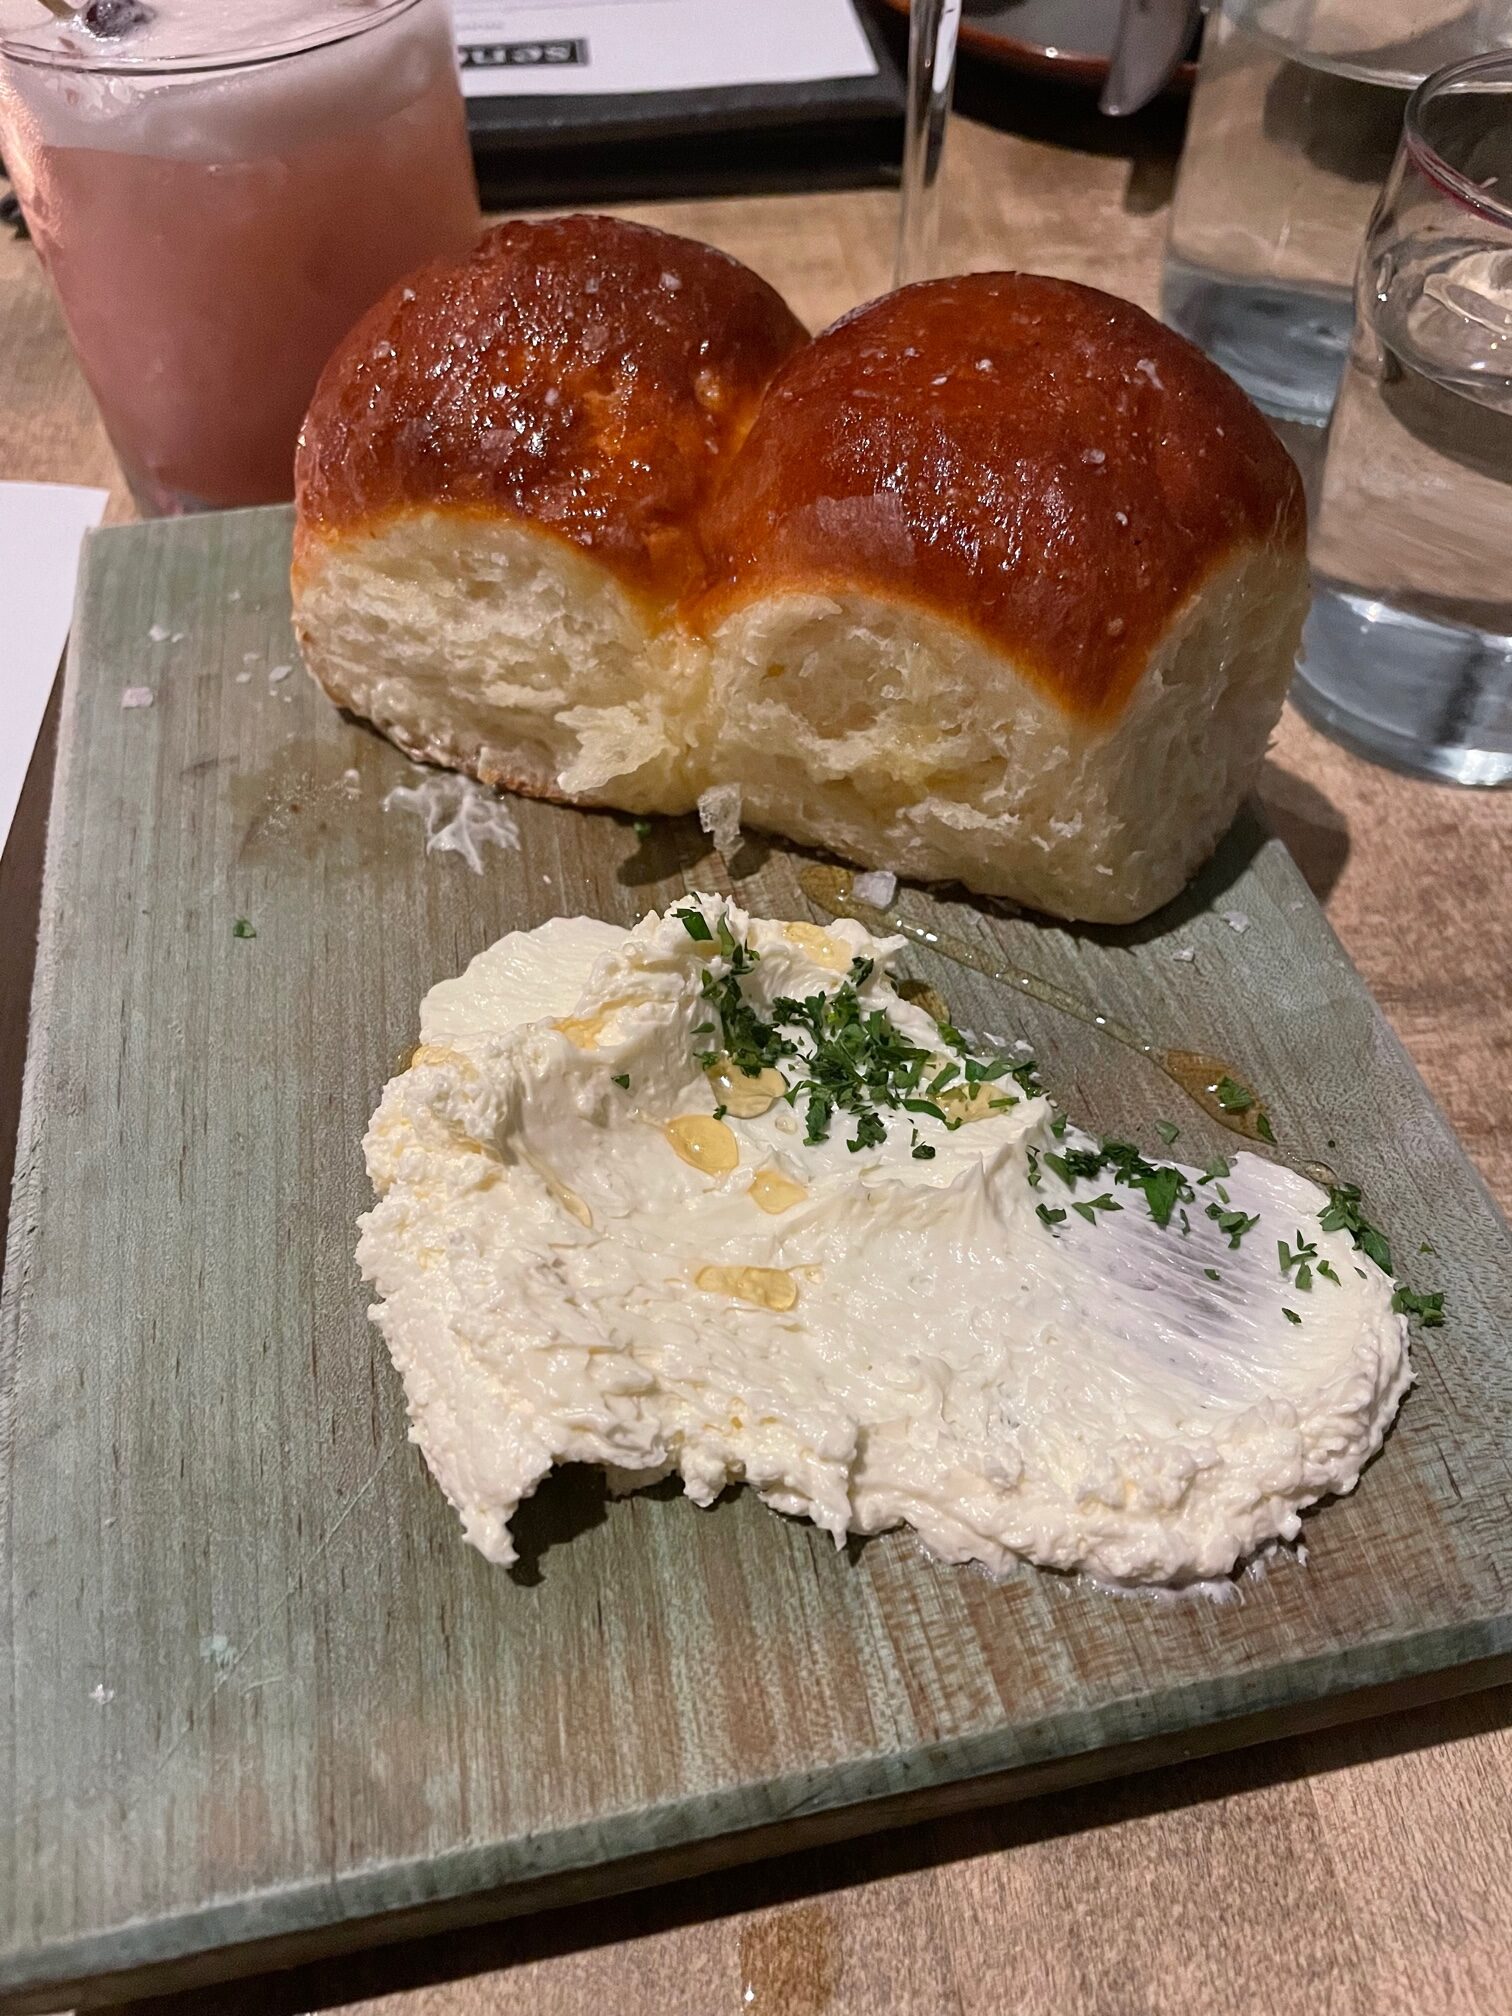 Parker house rolls and butter on a bard from Seneca restaurant in Saratoga Springs NY.